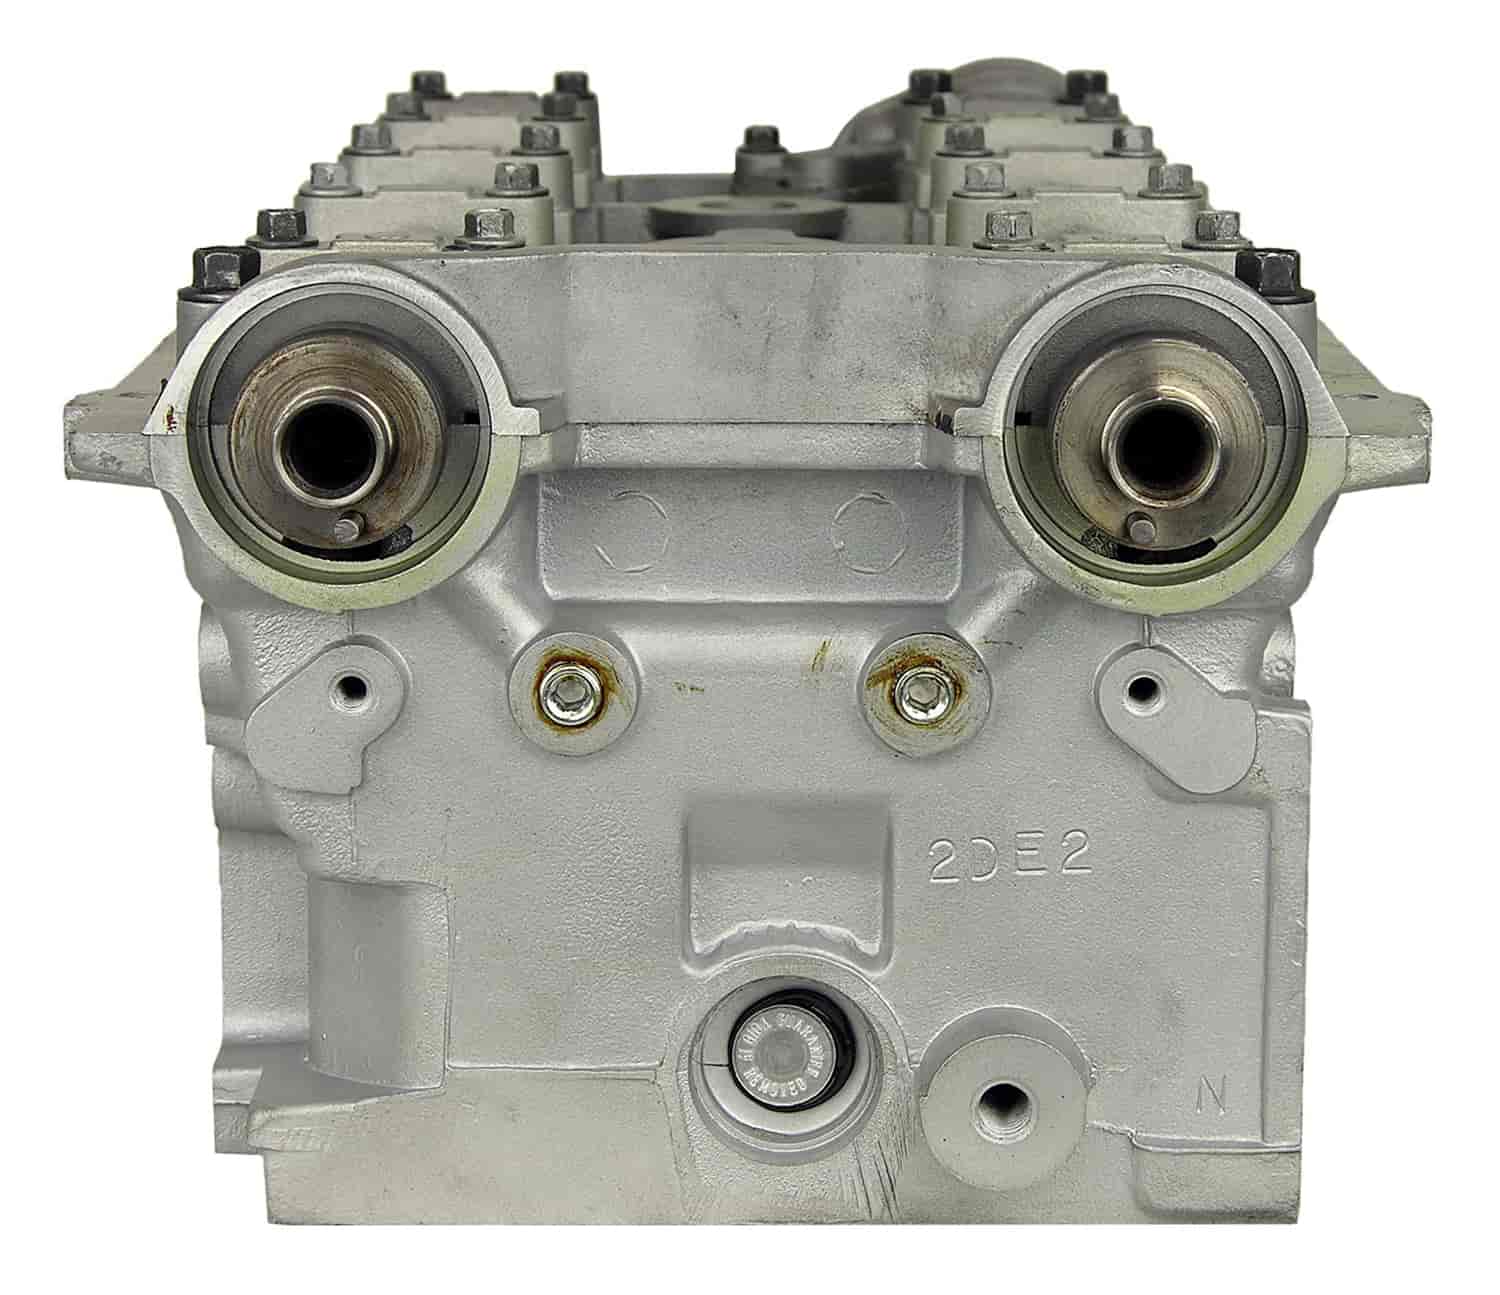 Remanufactured Cylinder Head for 2004-2009 Chrysler/Dodge/Jeep with 2.4L L4